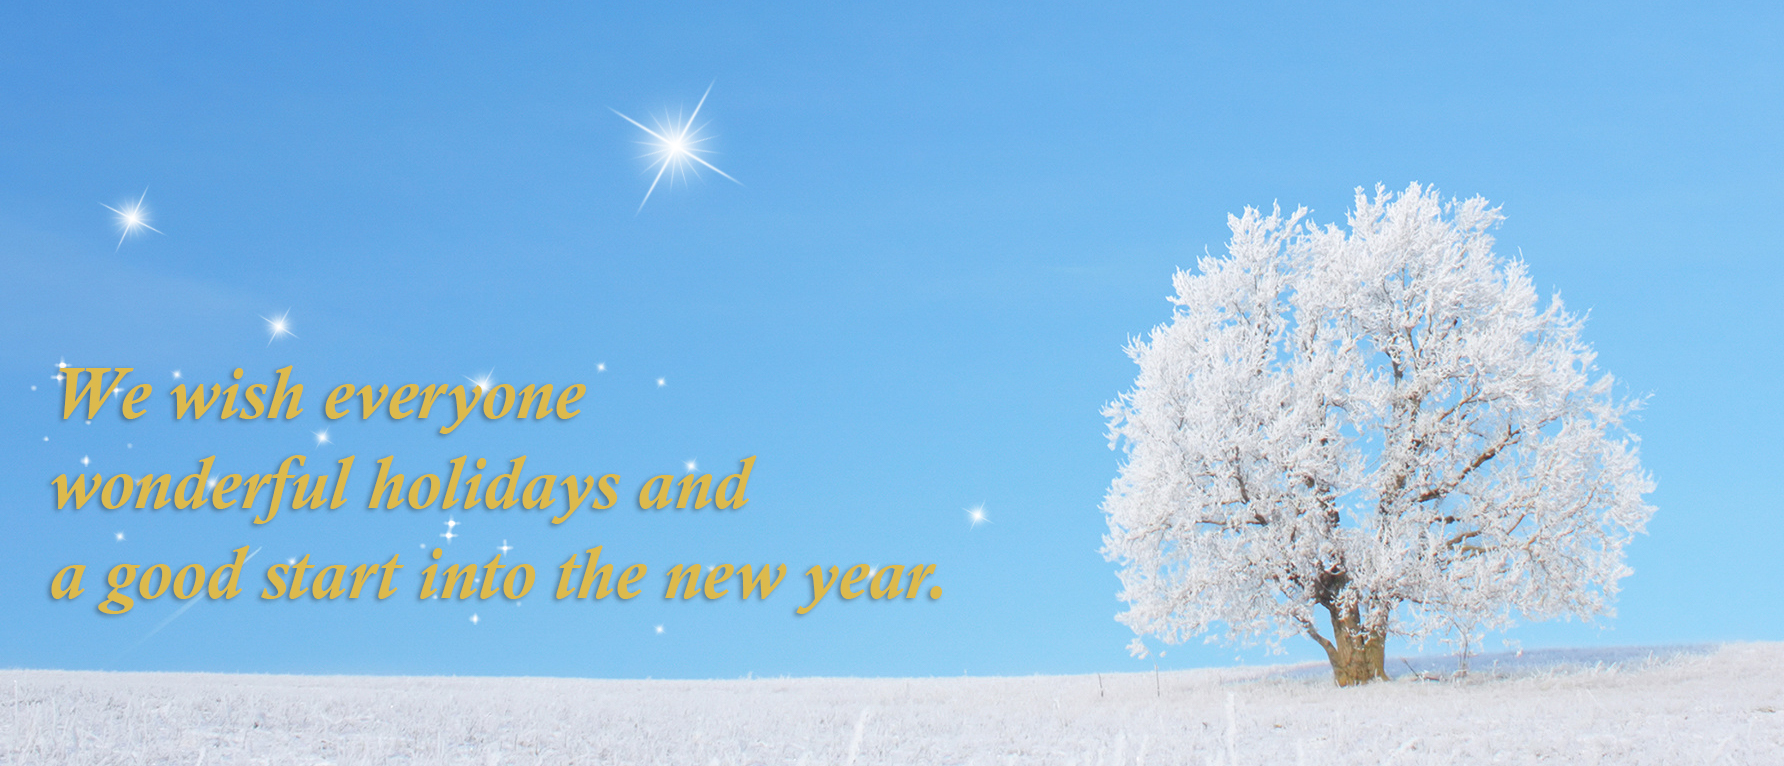 Christmas greetings: "We wish everyone wonderful holidays and a good start into the new year"